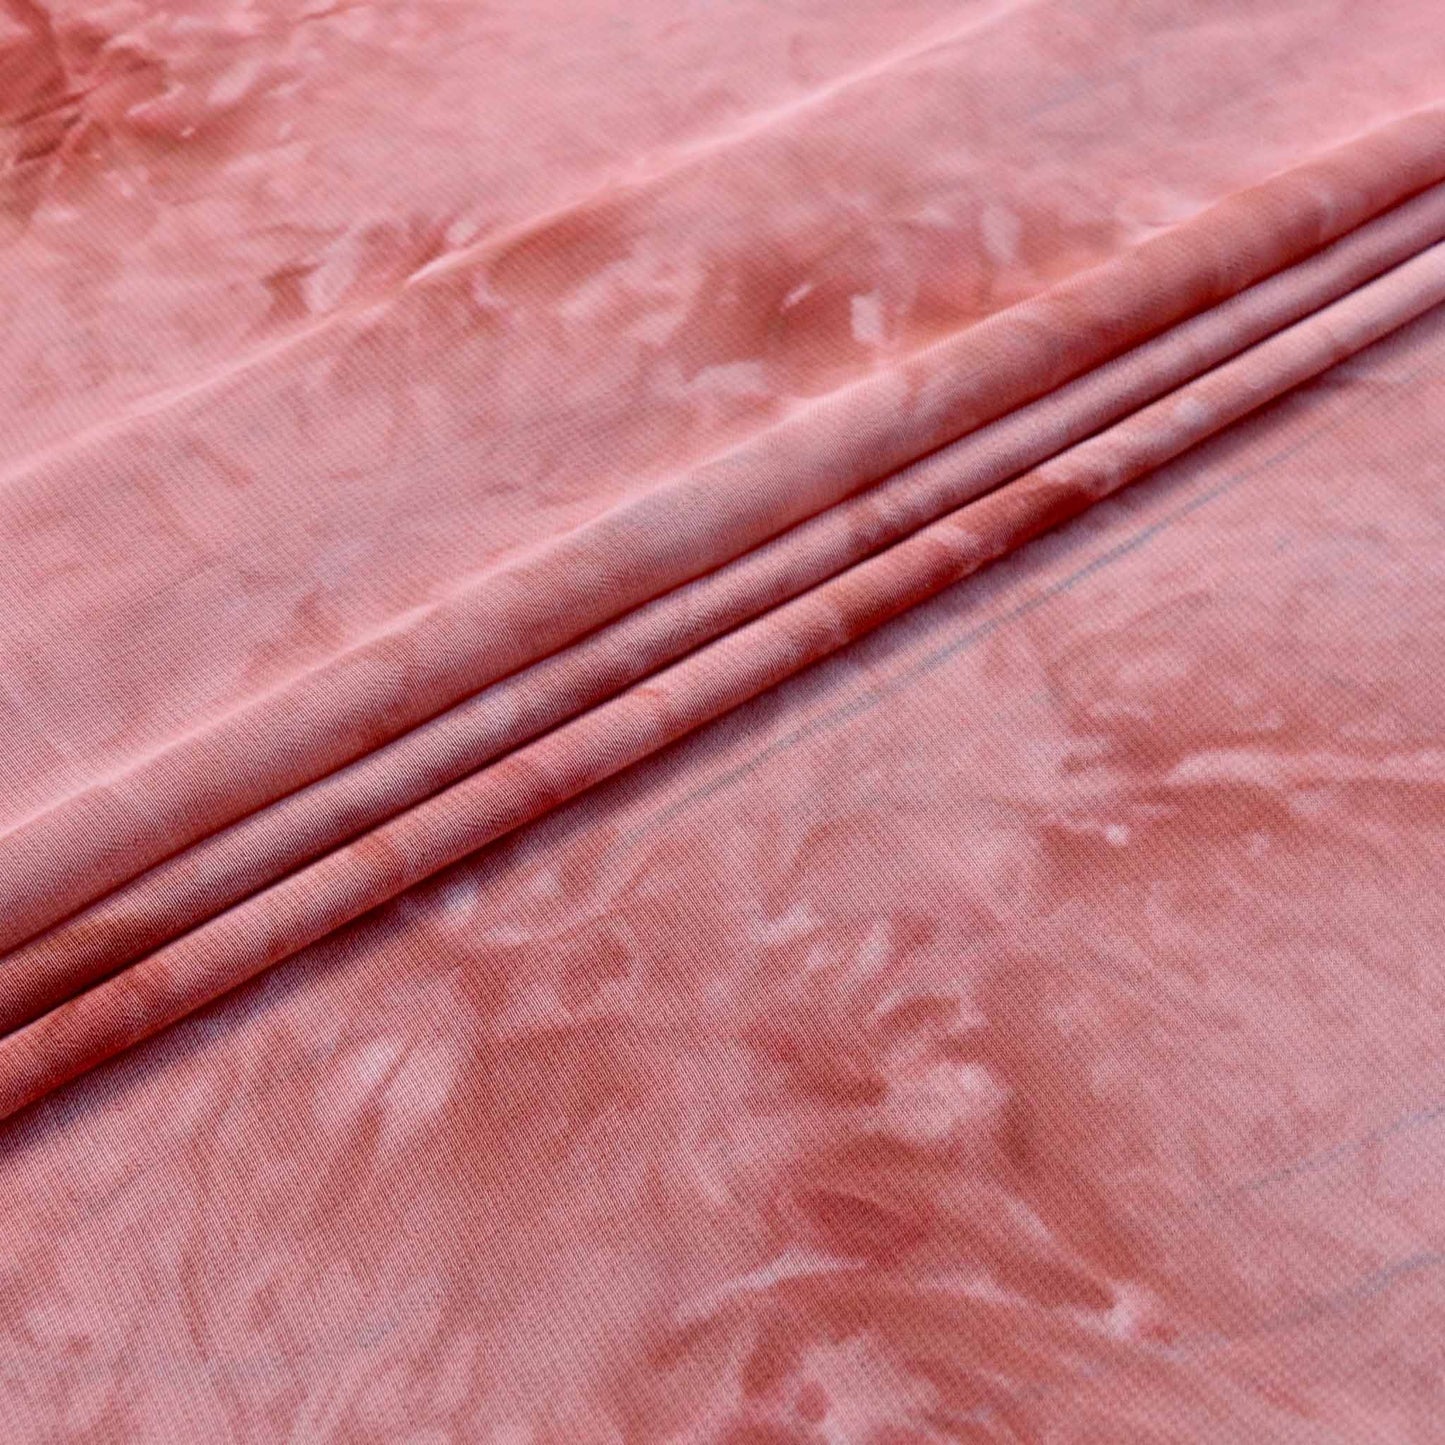 chiffon polyester dressmaking fabric in pink marble effect colour